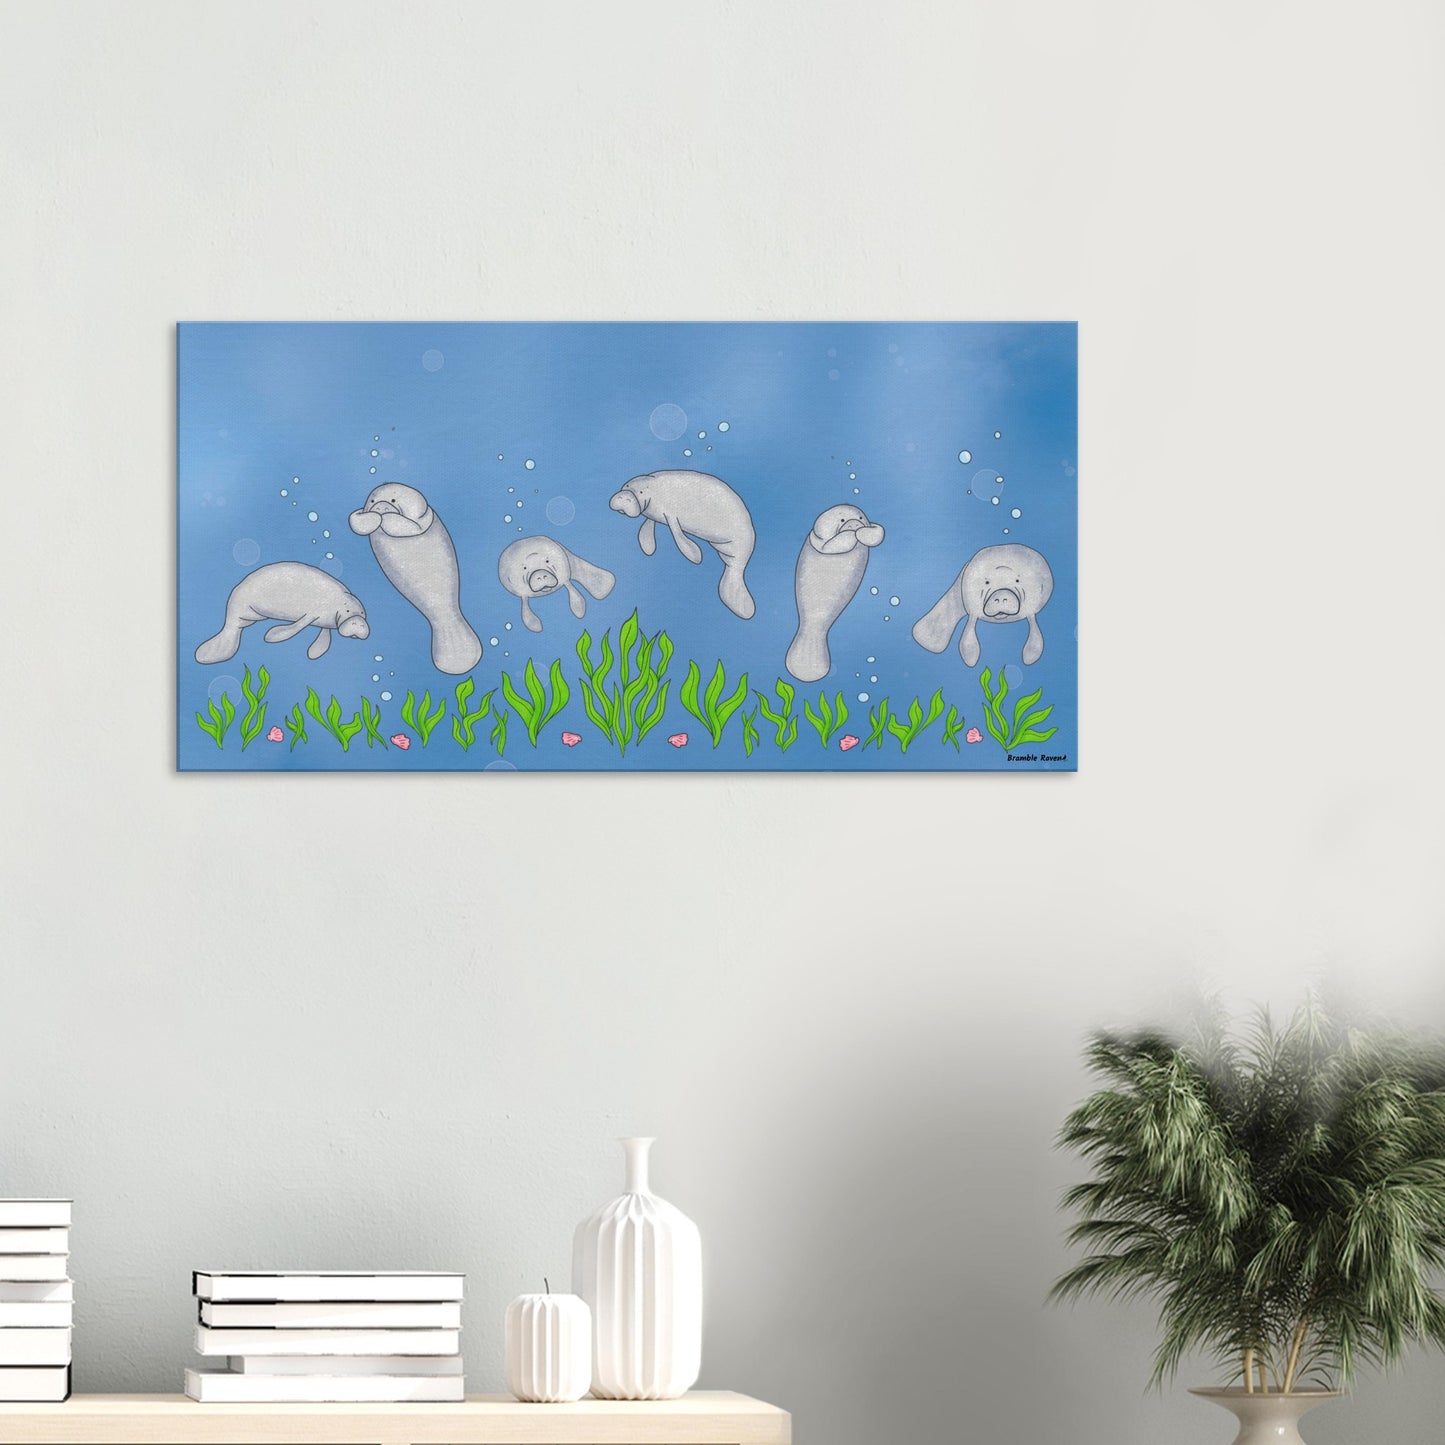 20 by 40 inch slim canvas wall art print featuring cute illustrated manatees swimming above the seabed. Shown on wall above tabletop with books and a potted plant.